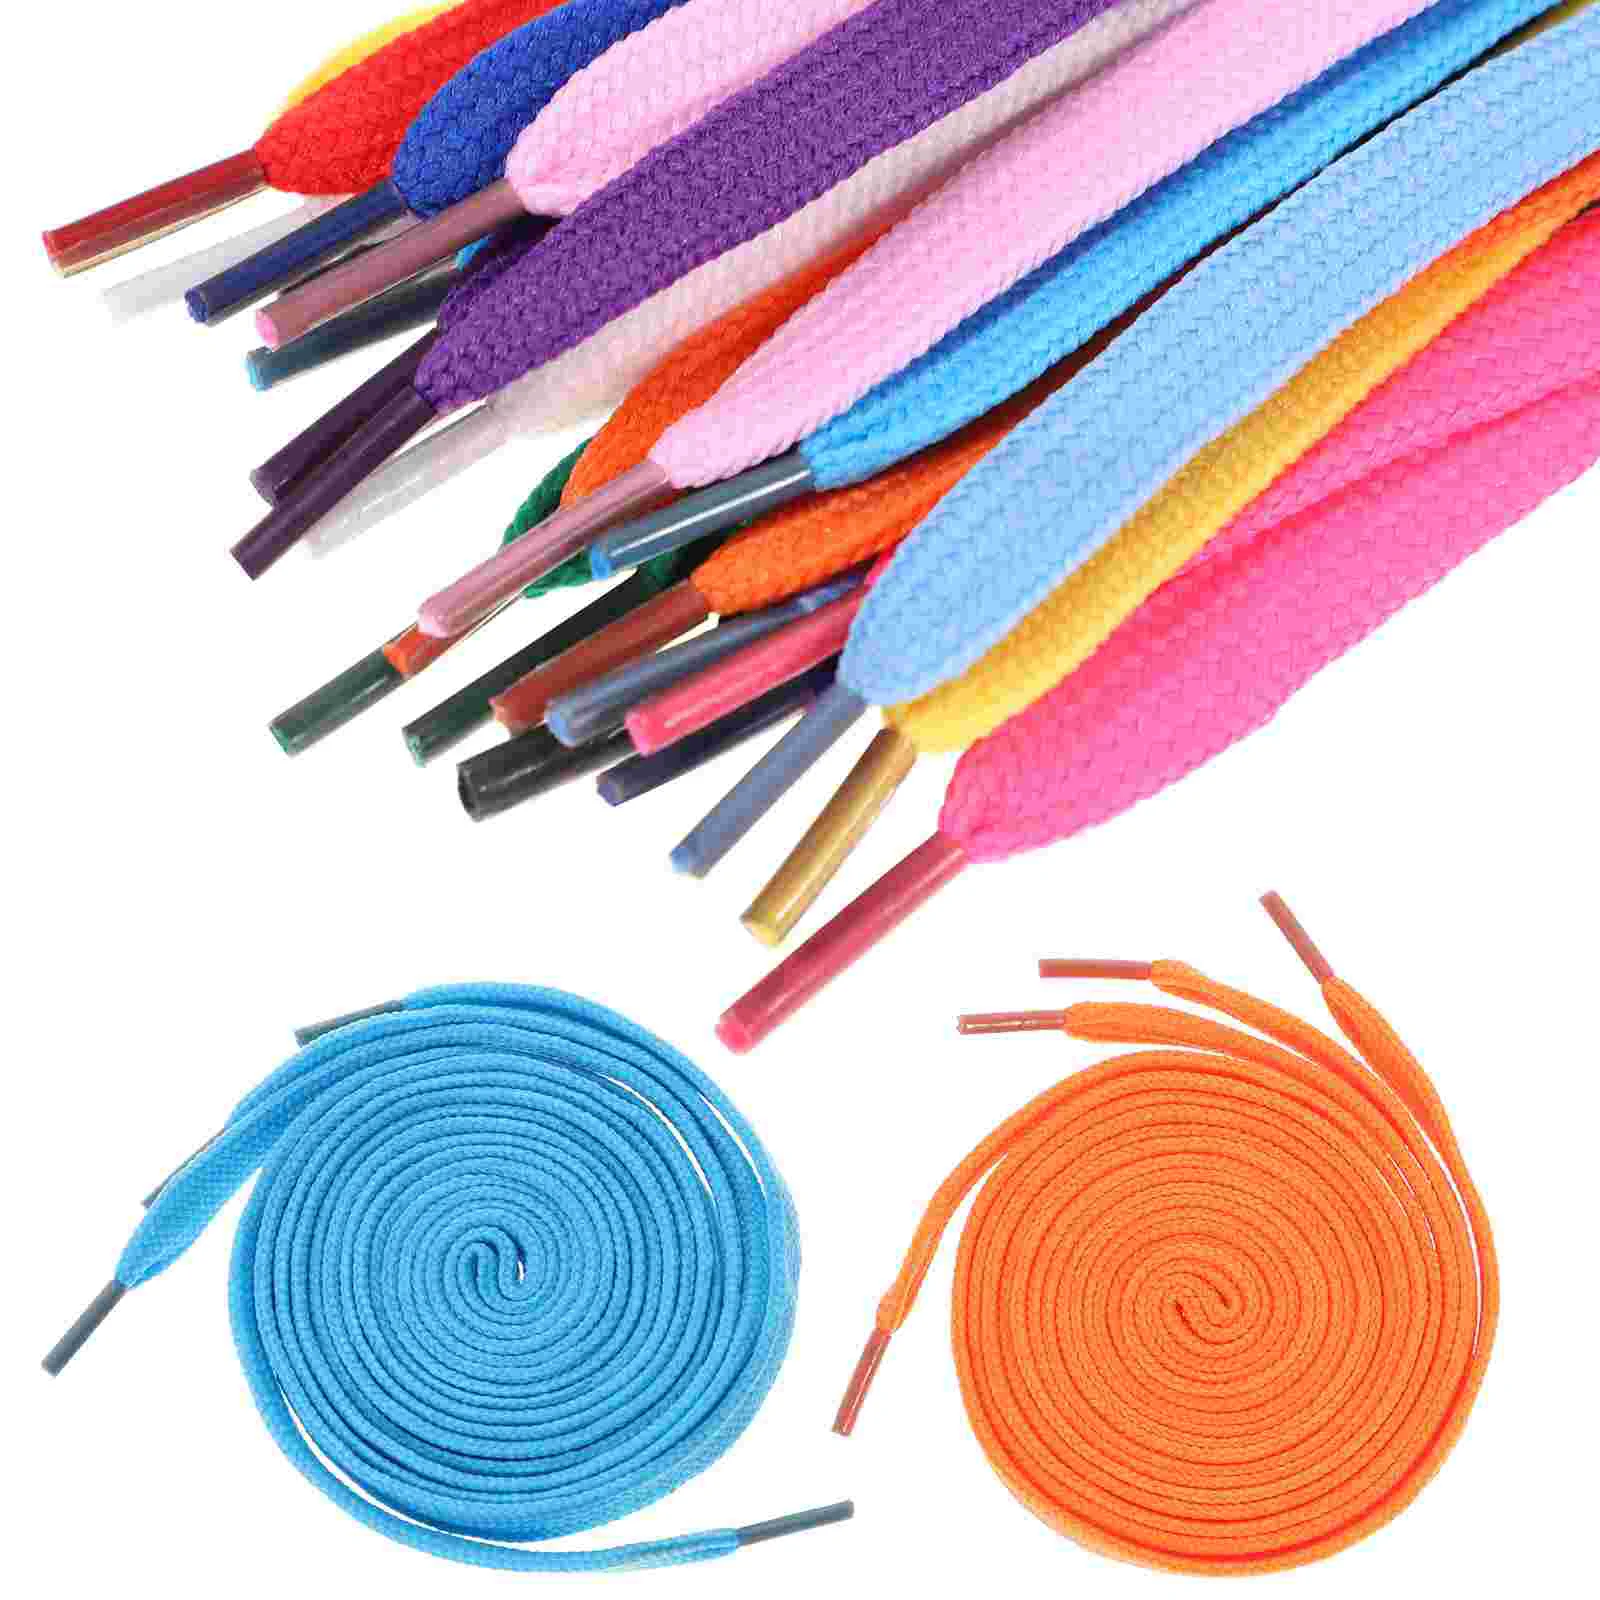 of Replacement Flat Shoelaces Shoe Laces Strings for Sports Shoes /Boots /Sneakers /Skates (Assorted Colors) 1 pair of flat lace exquisite high quality polyester laces fashion sports casual shoes laces solid flat laces 26 colors classic